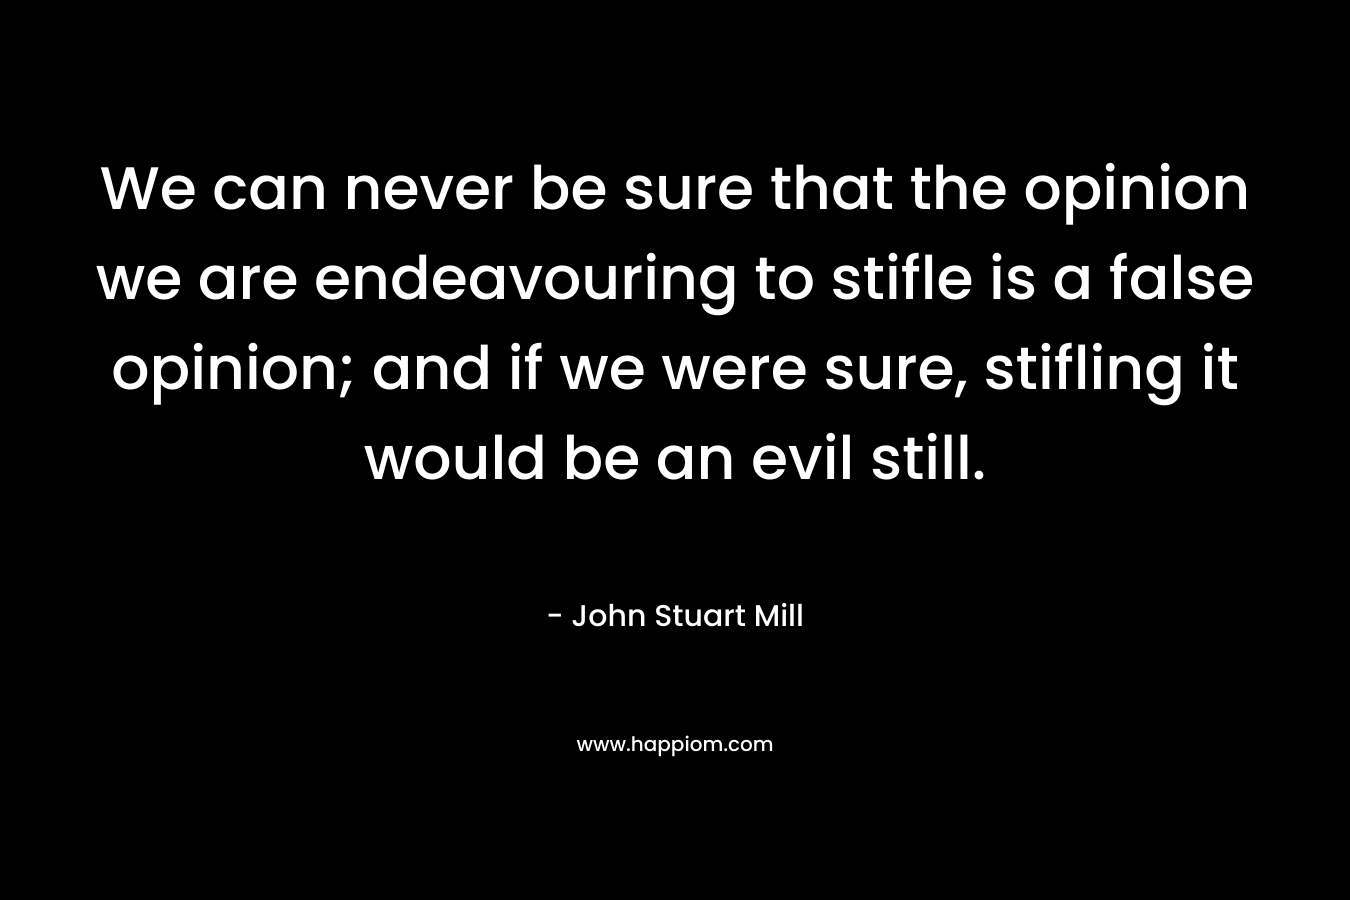 We can never be sure that the opinion we are endeavouring to stifle is a false opinion; and if we were sure, stifling it would be an evil still.